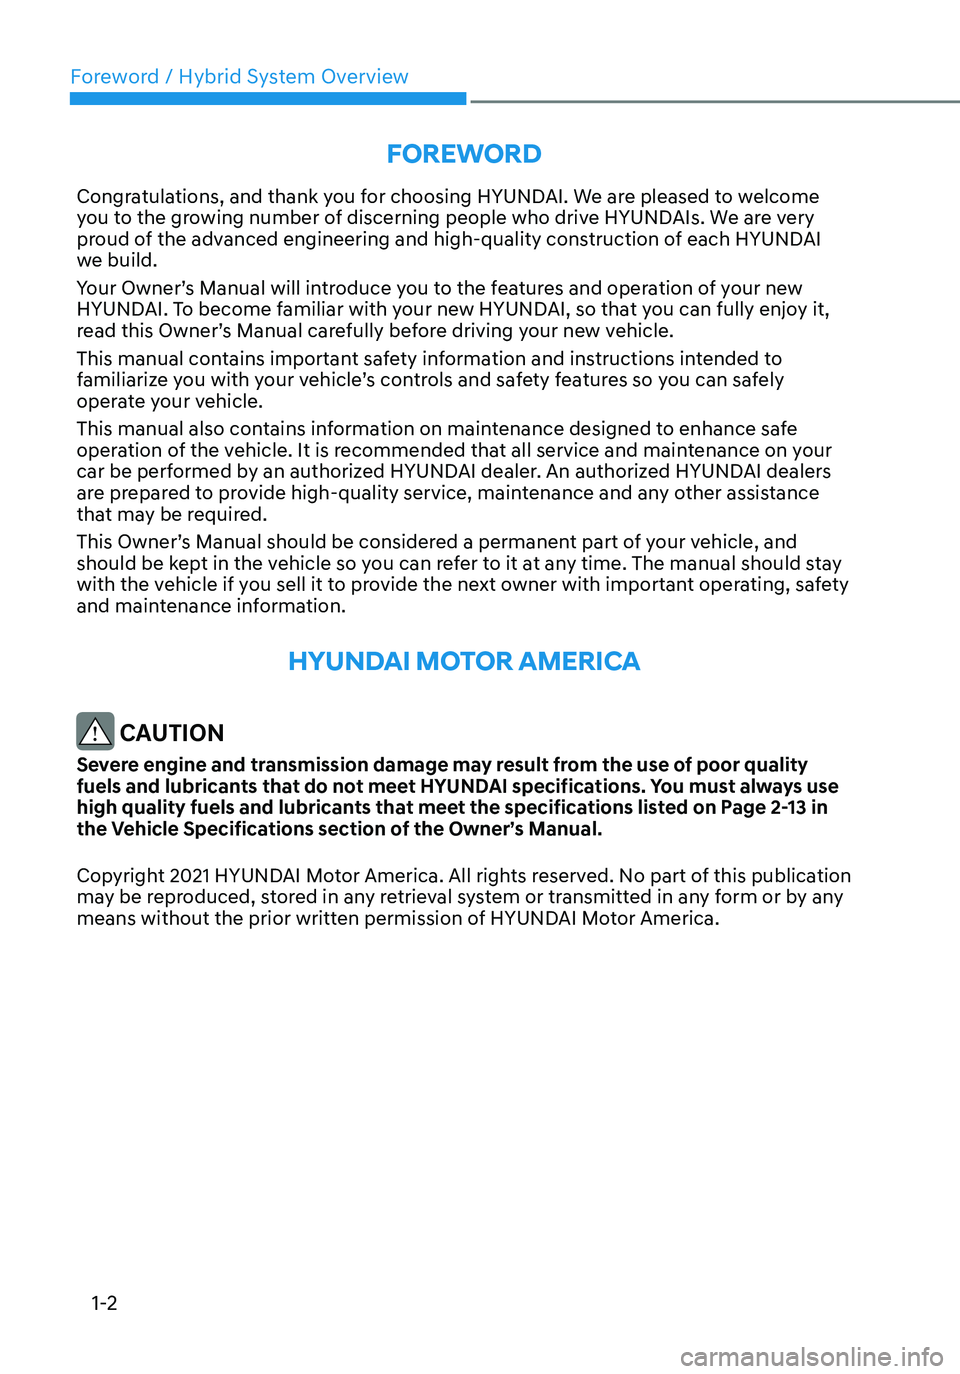 HYUNDAI TUCSON HYBRID 2021  Owners Manual Foreword / Hybrid System Overview
1-2
FOREWORD
Congratulations, and thank you for choosing HYUNDAI. We are pleased to welcome 
you to the growing number of discerning people who drive HYUNDAIs. We are